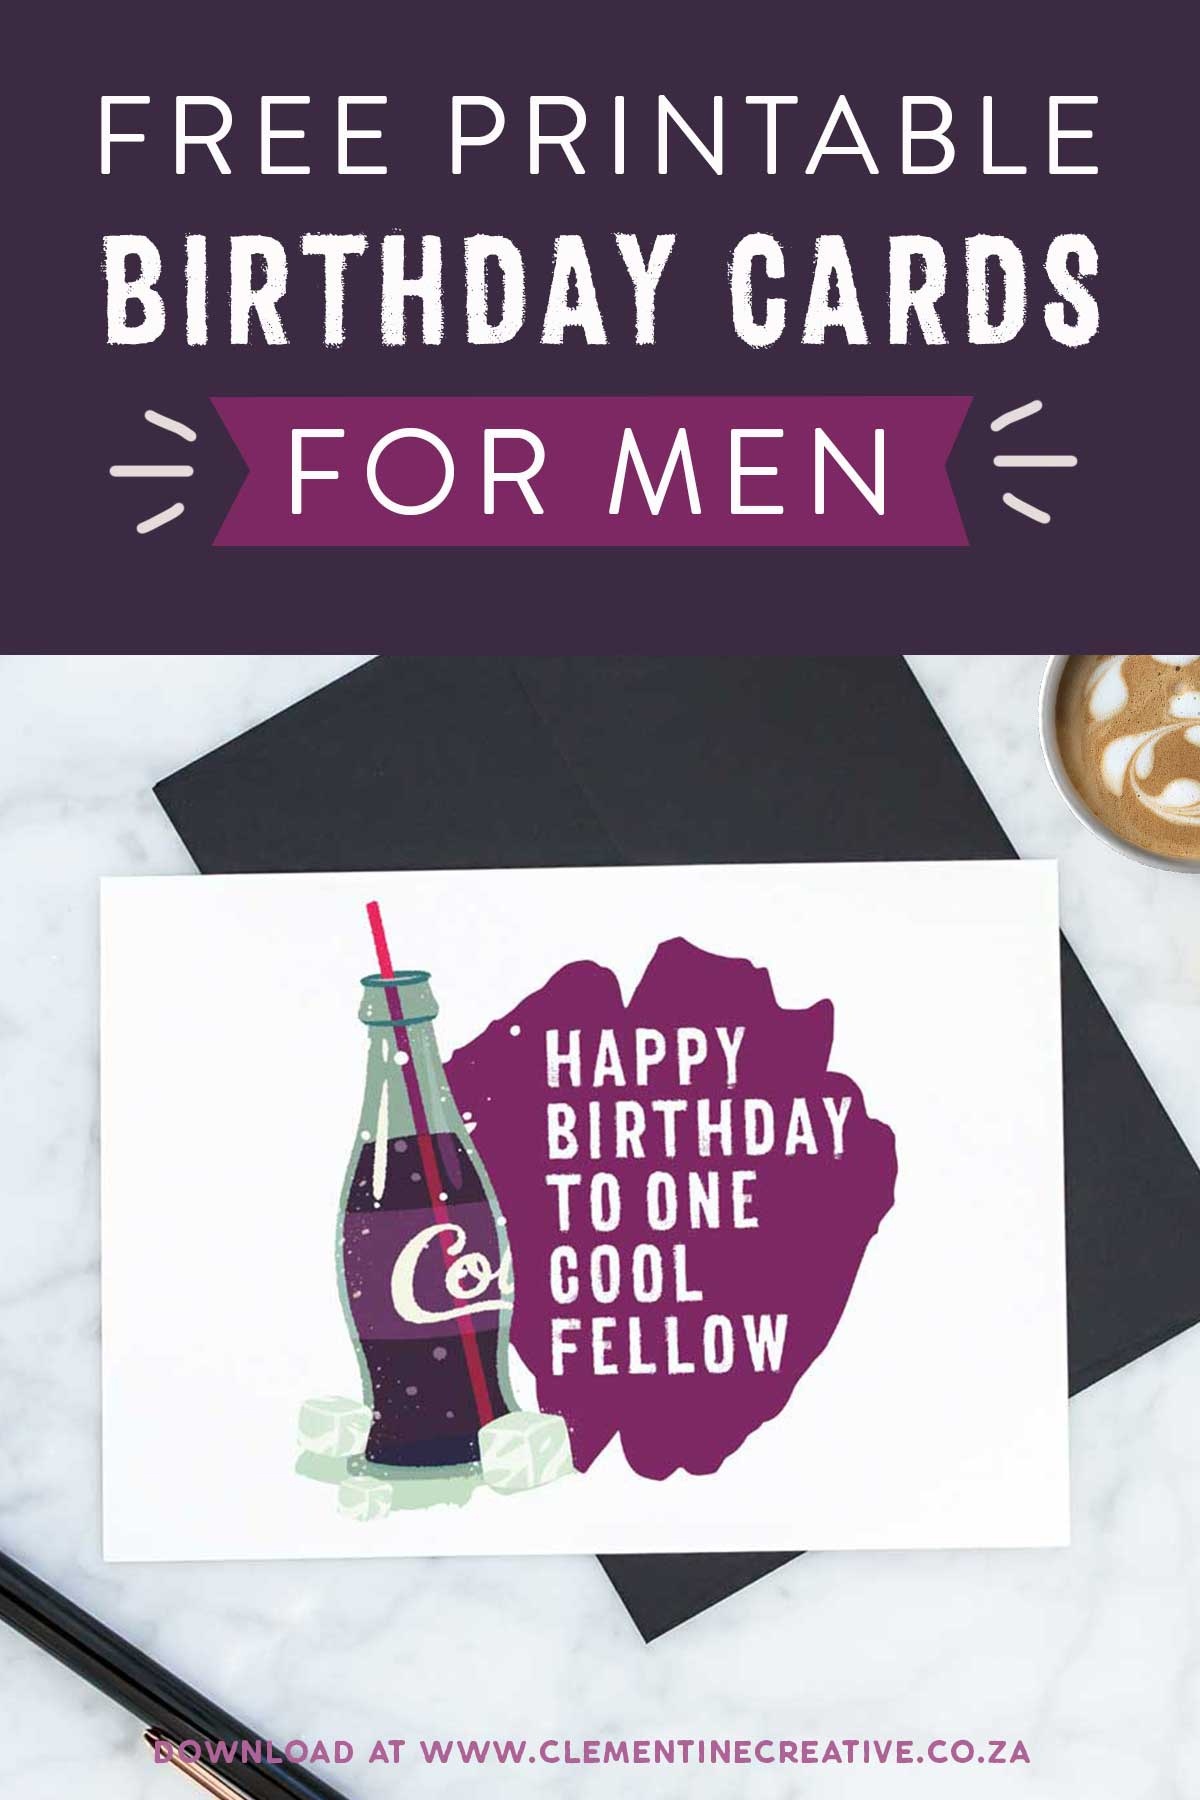 Free Printable Birthday Cards For Him | Stay Cool - Free Printable Birthday Scrolls